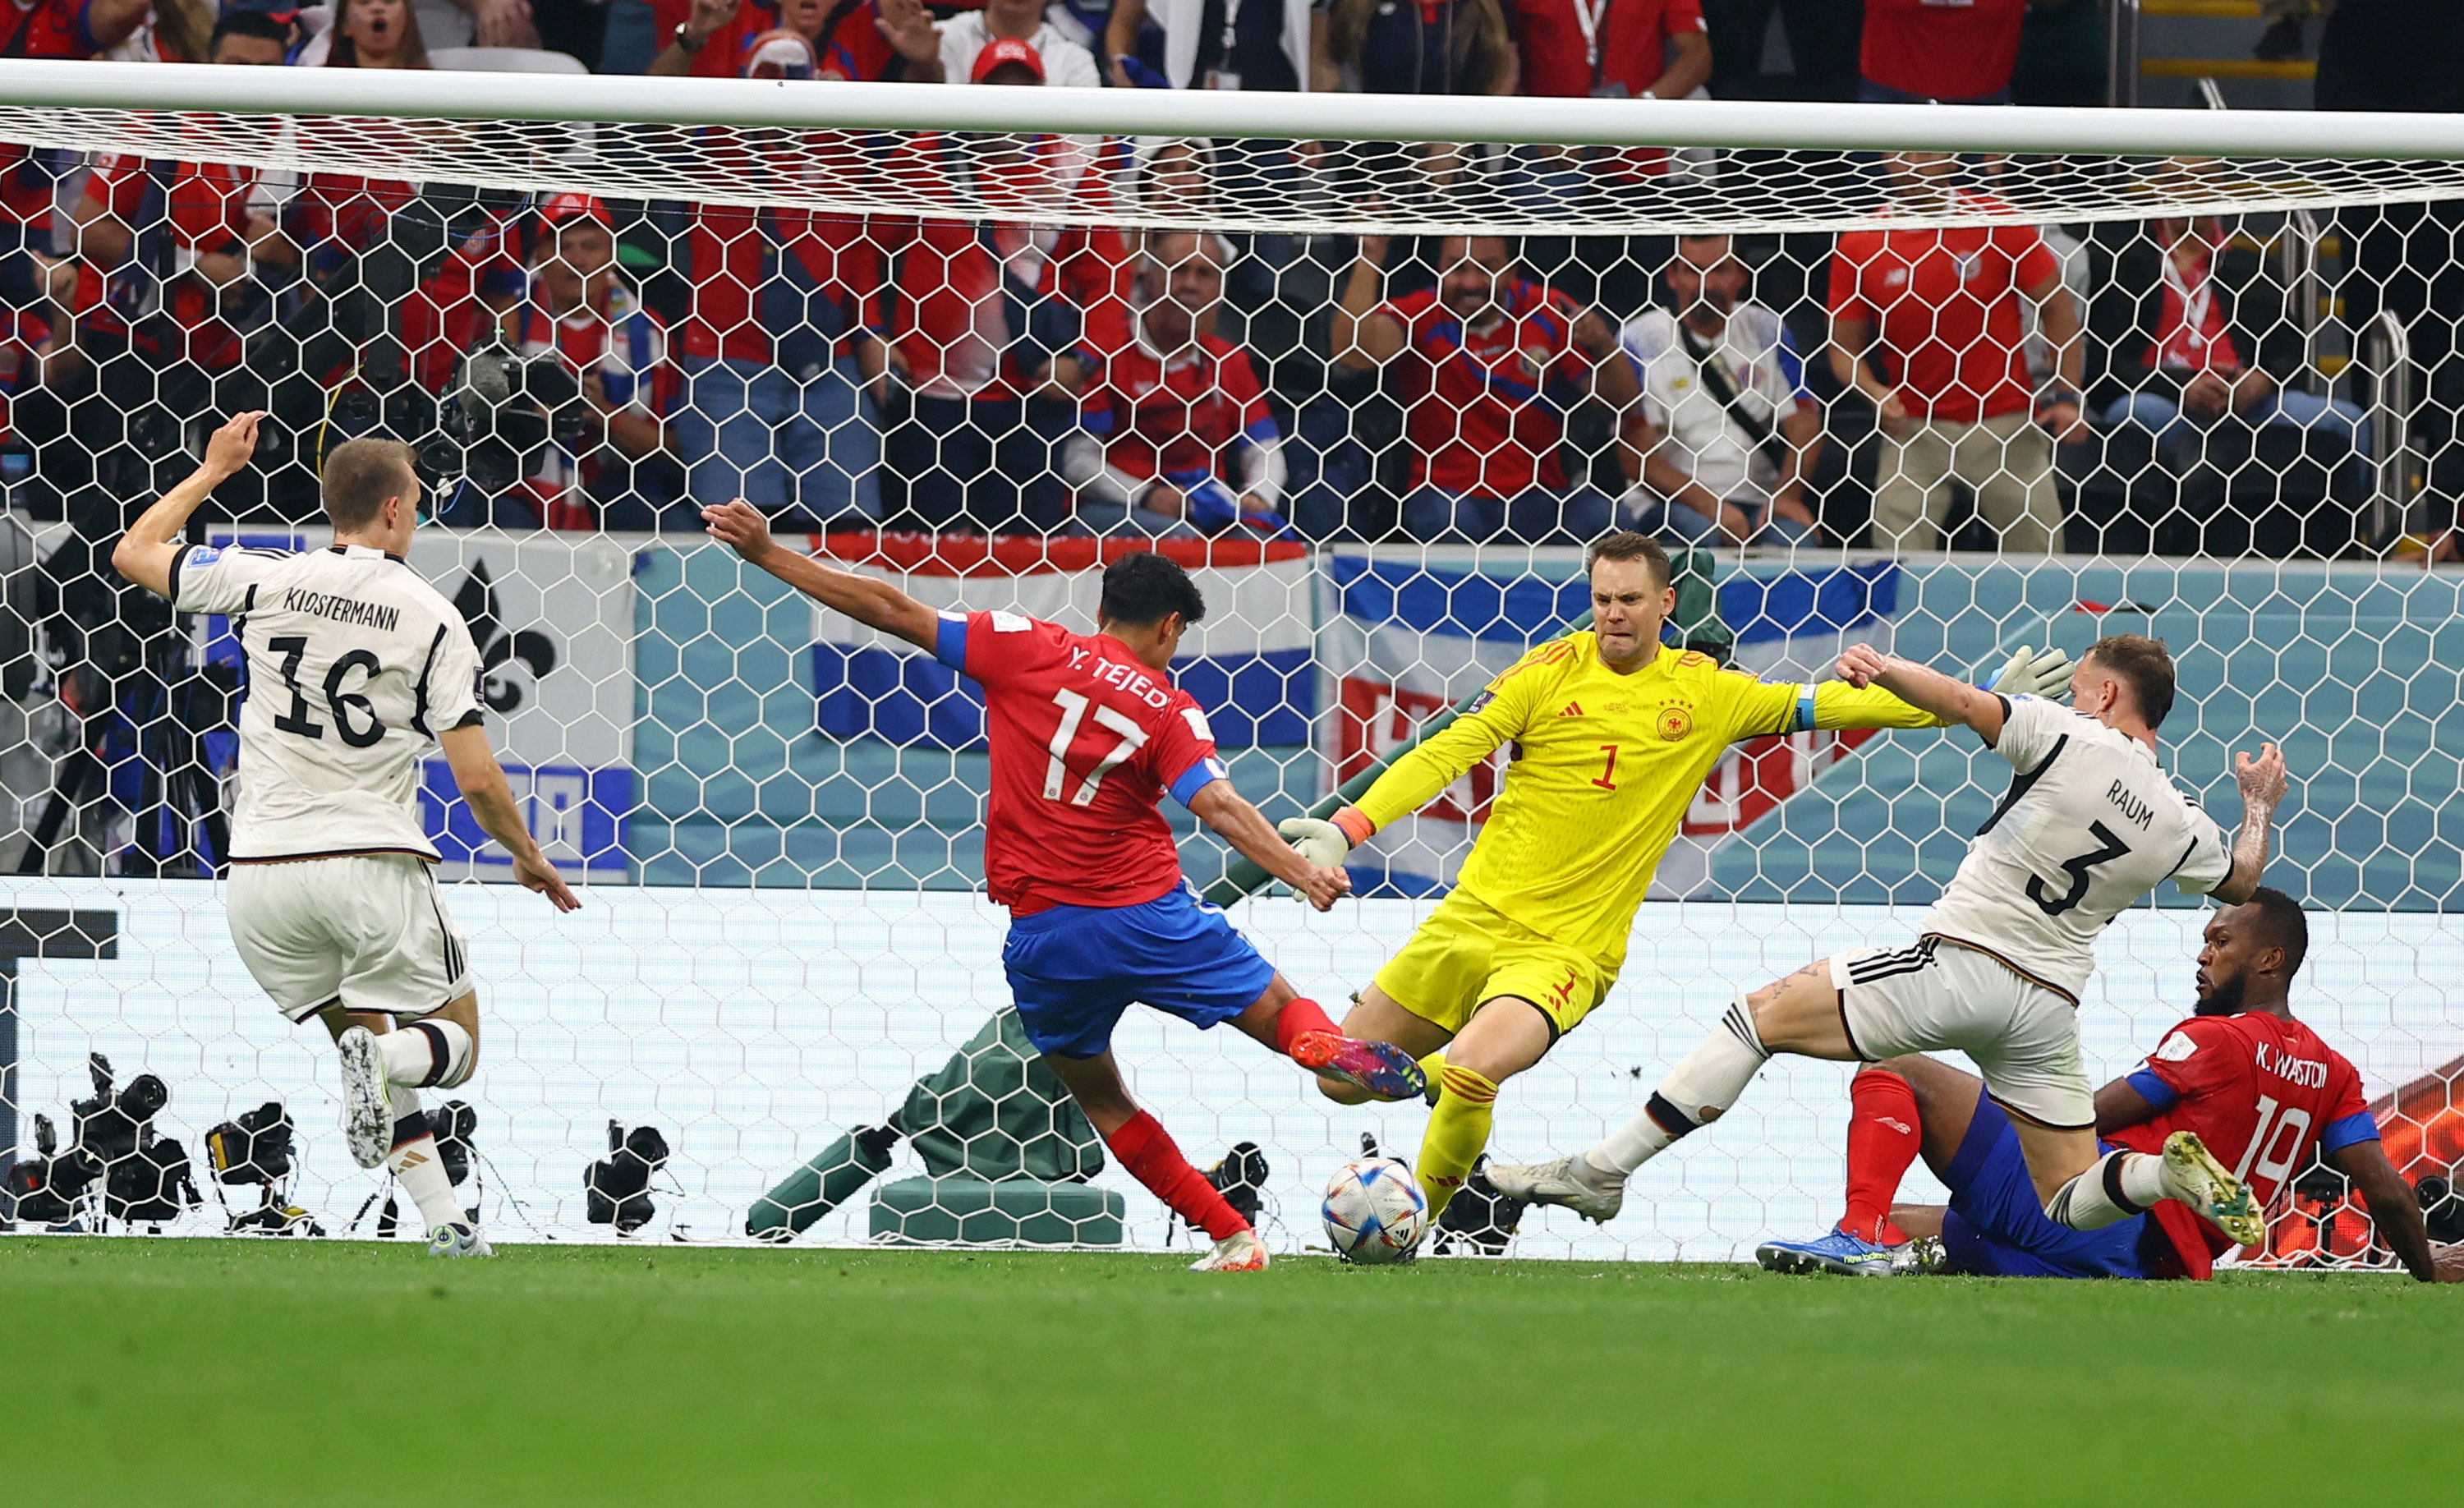 Costa Rica's Yeltsin Tejeda scores his team's first goal against Germany.